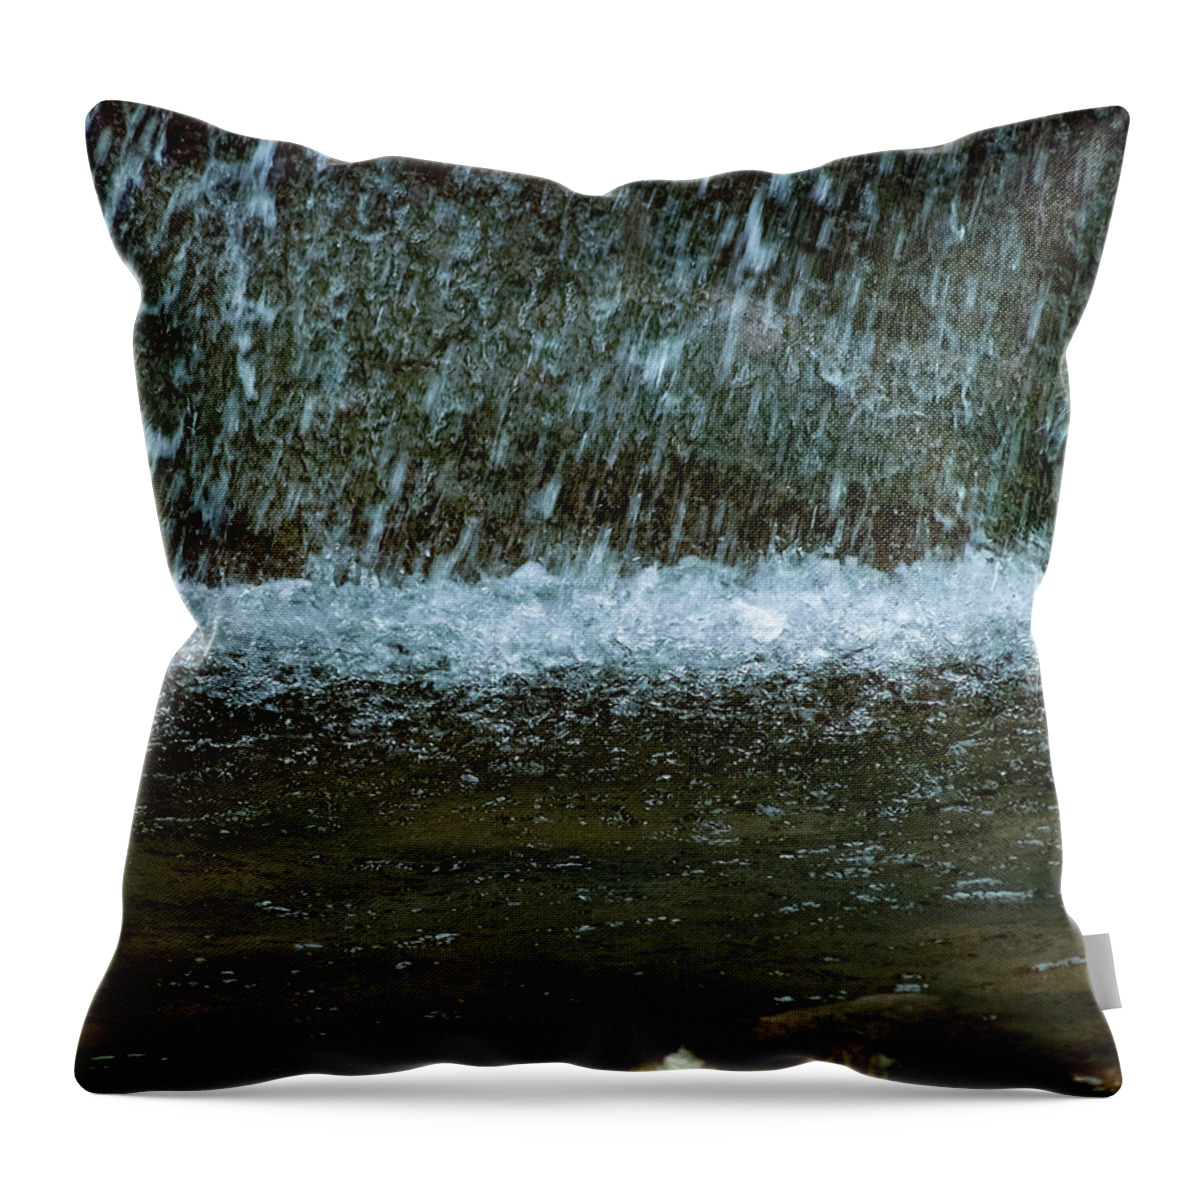 Waterdrops In The Waterfall Spillway Throw Pillow featuring the photograph Waterdrops In The Waterfall Spillway by Flees Photos